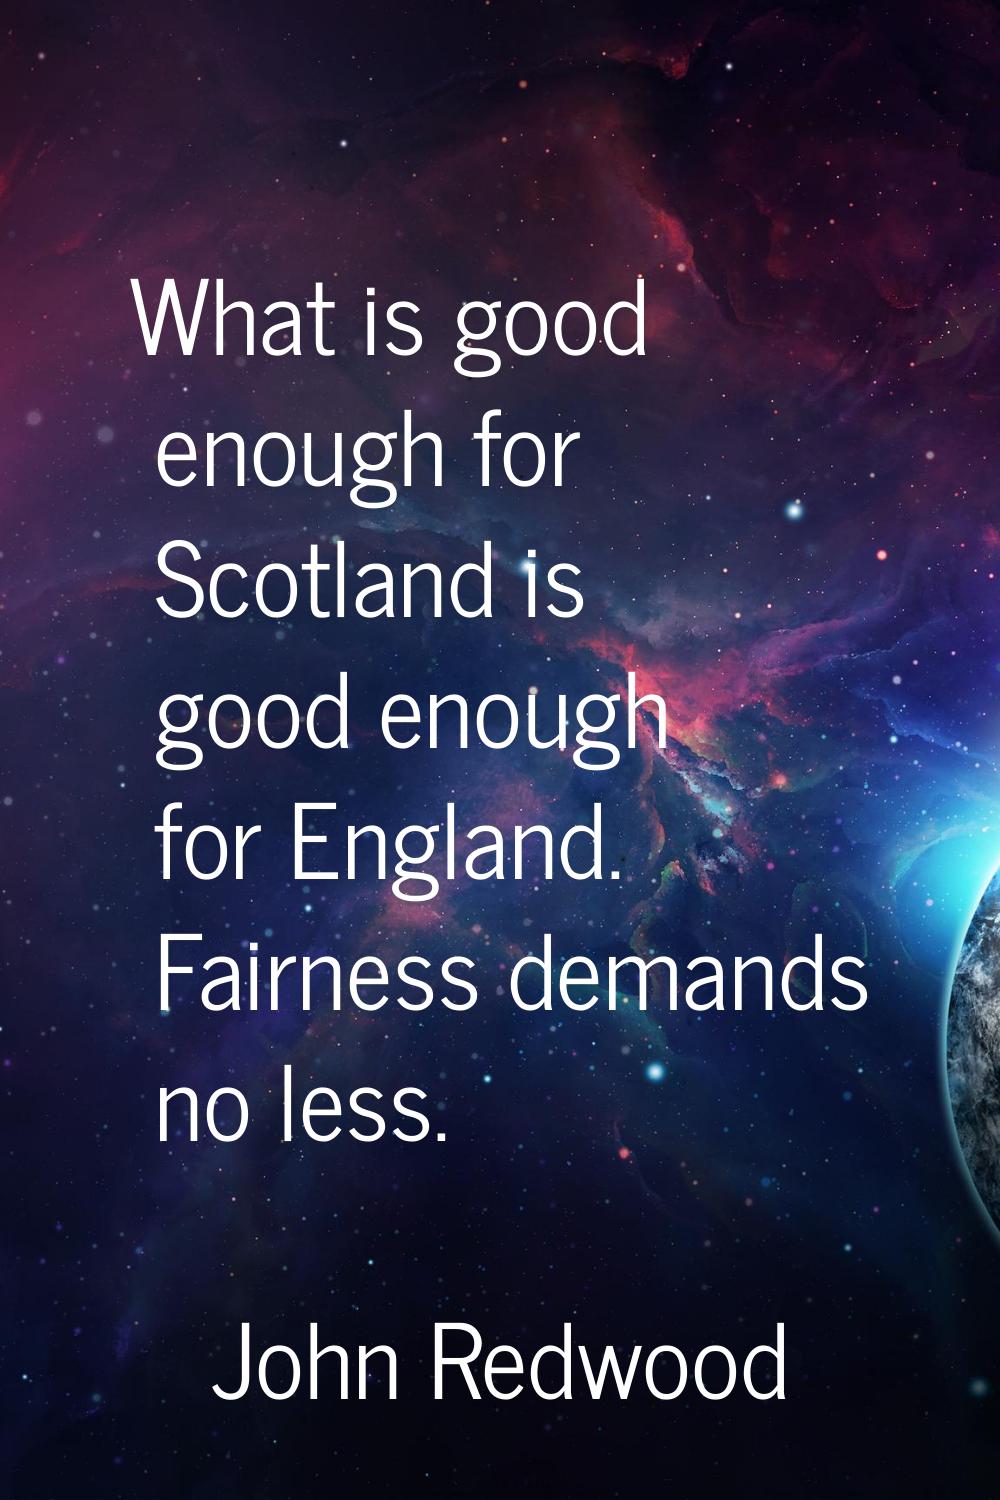 What is good enough for Scotland is good enough for England. Fairness demands no less.